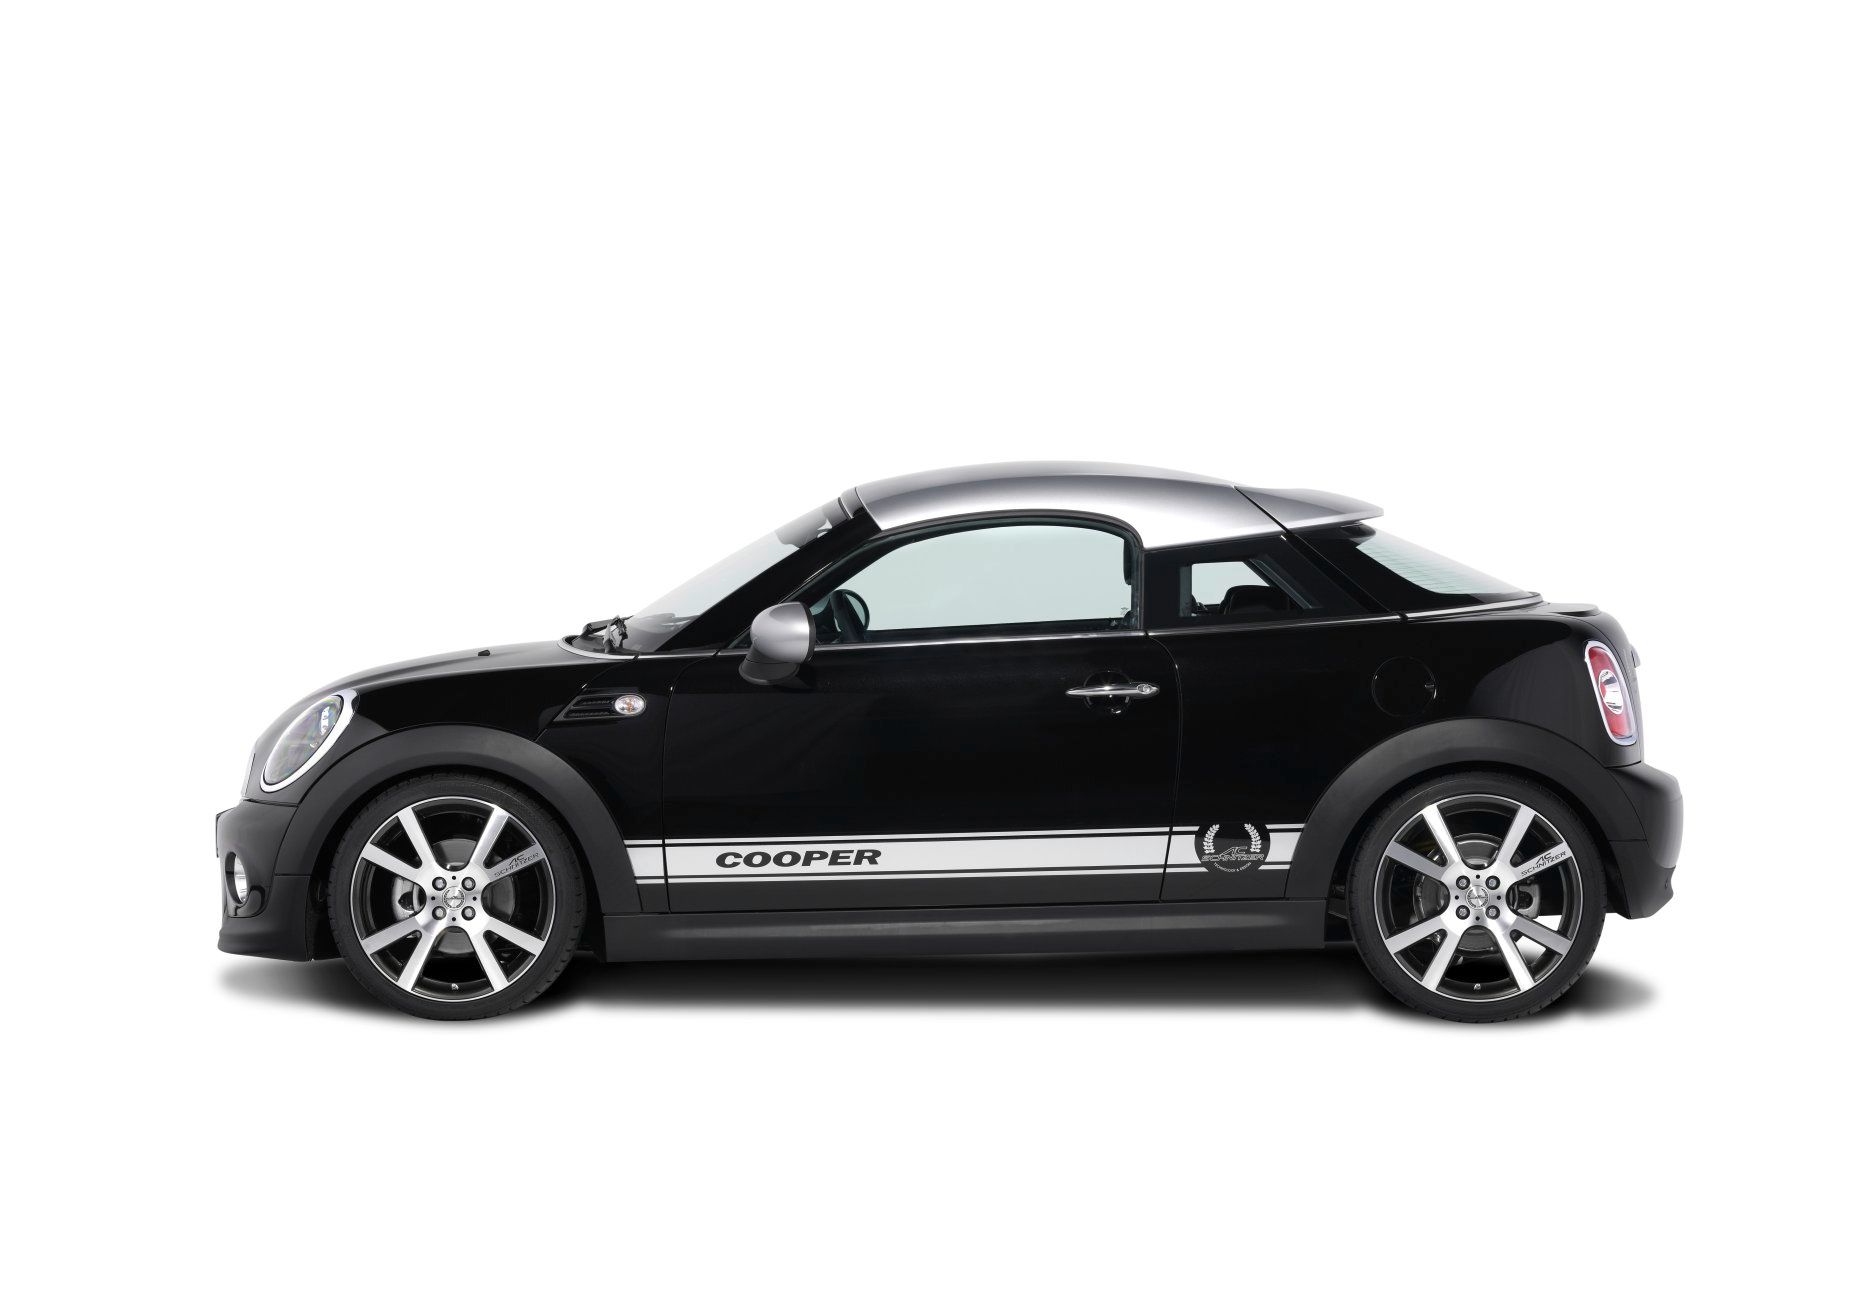 2012 MINI Coupe by AC Schnitzer 